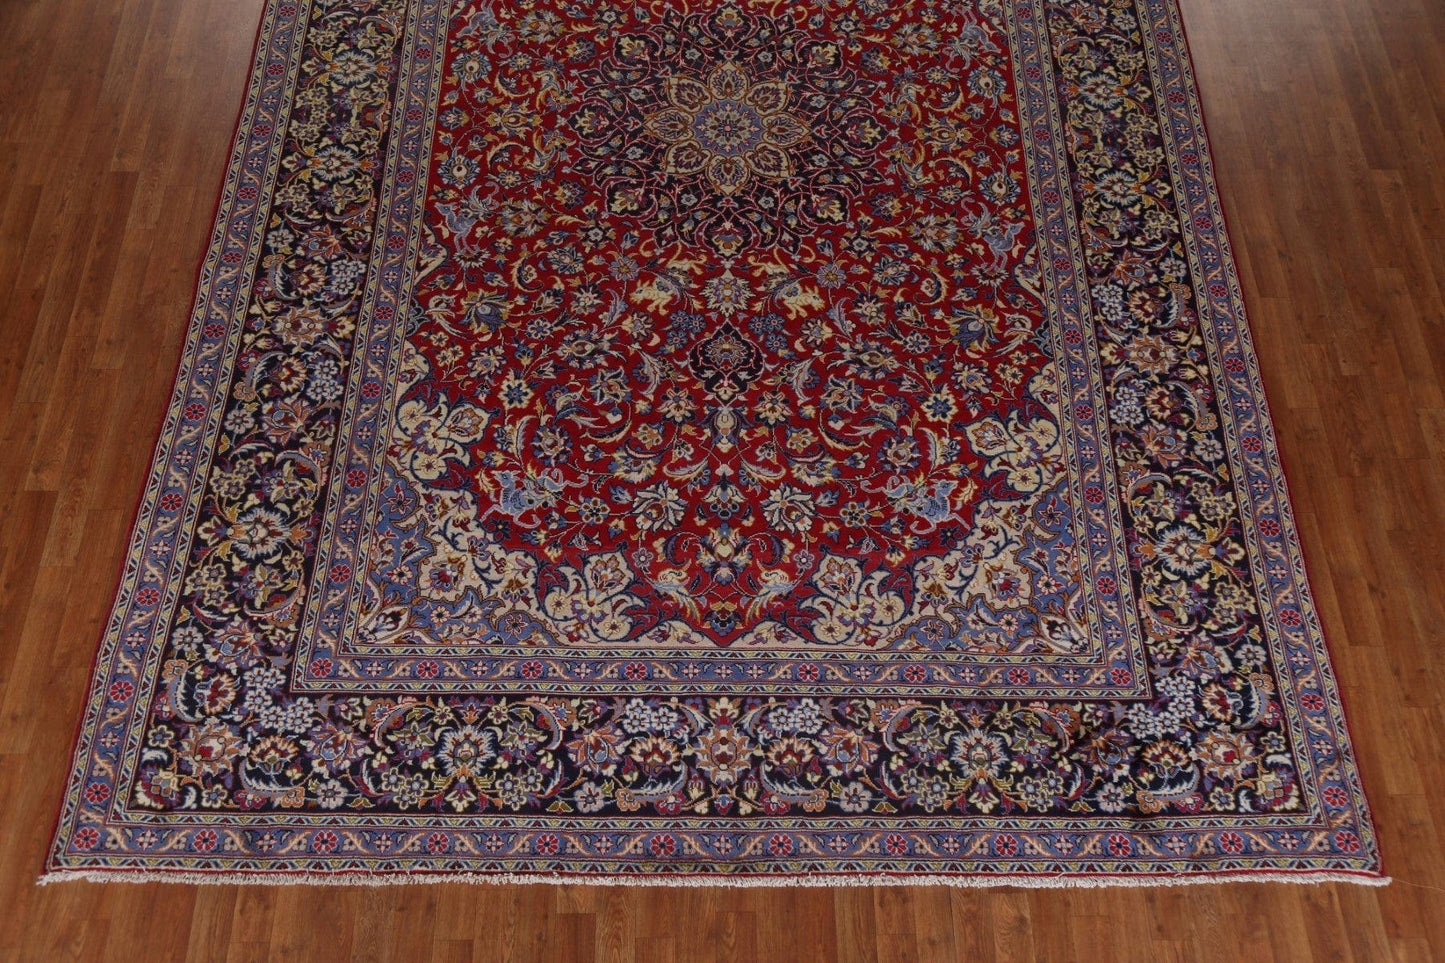 Floral Red Isfahan Persian Area Rug 9x14